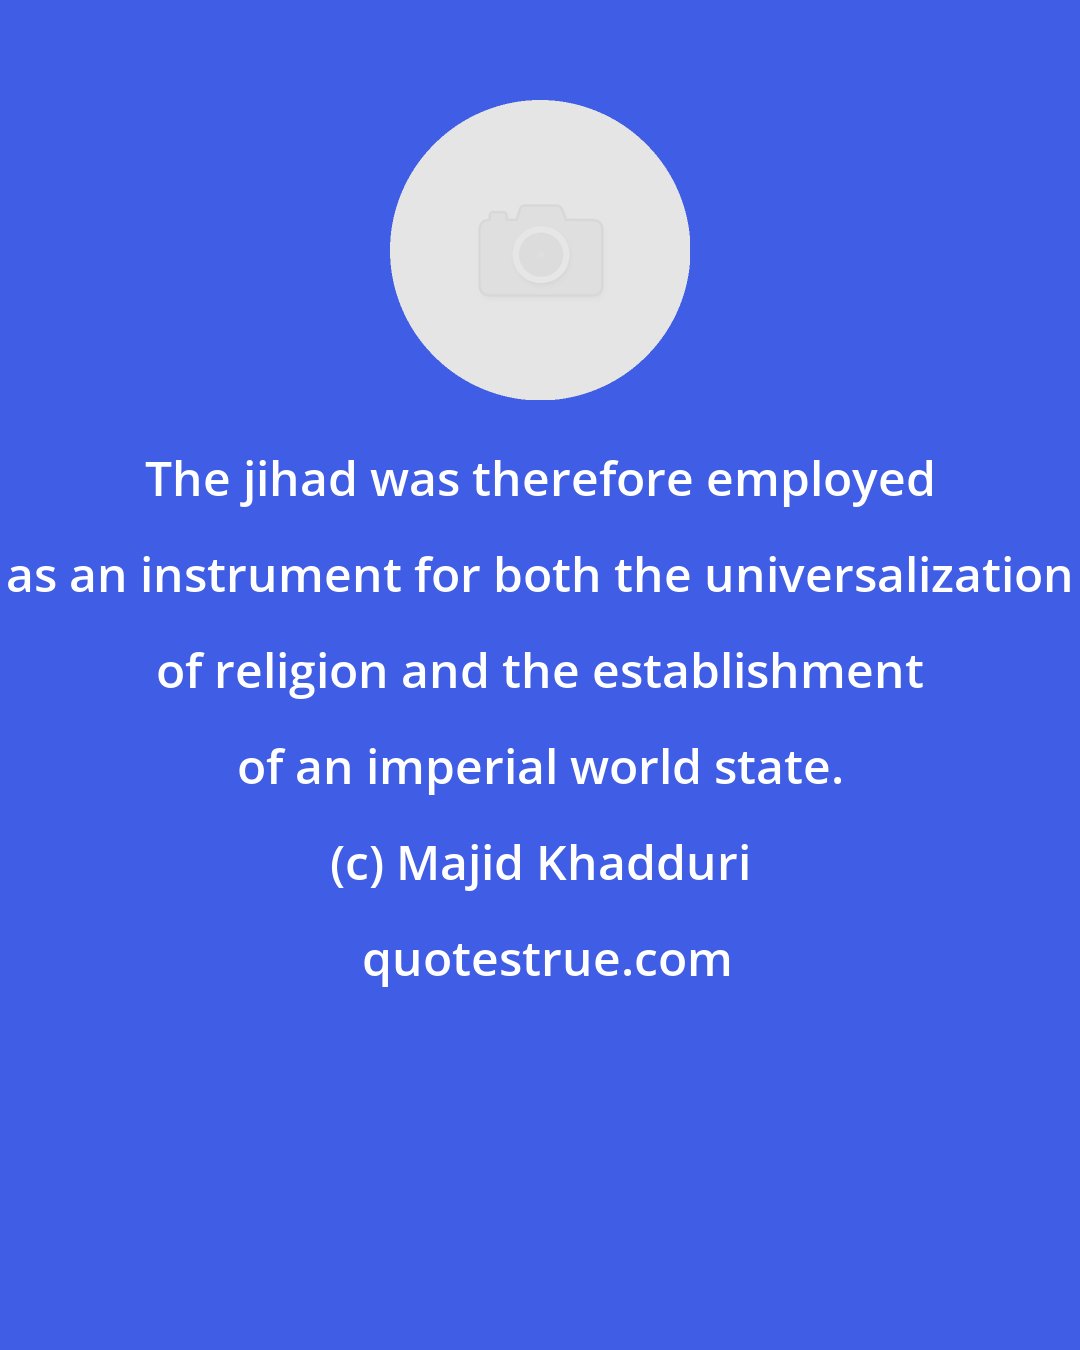 Majid Khadduri: The jihad was therefore employed as an instrument for both the universalization of religion and the establishment of an imperial world state.